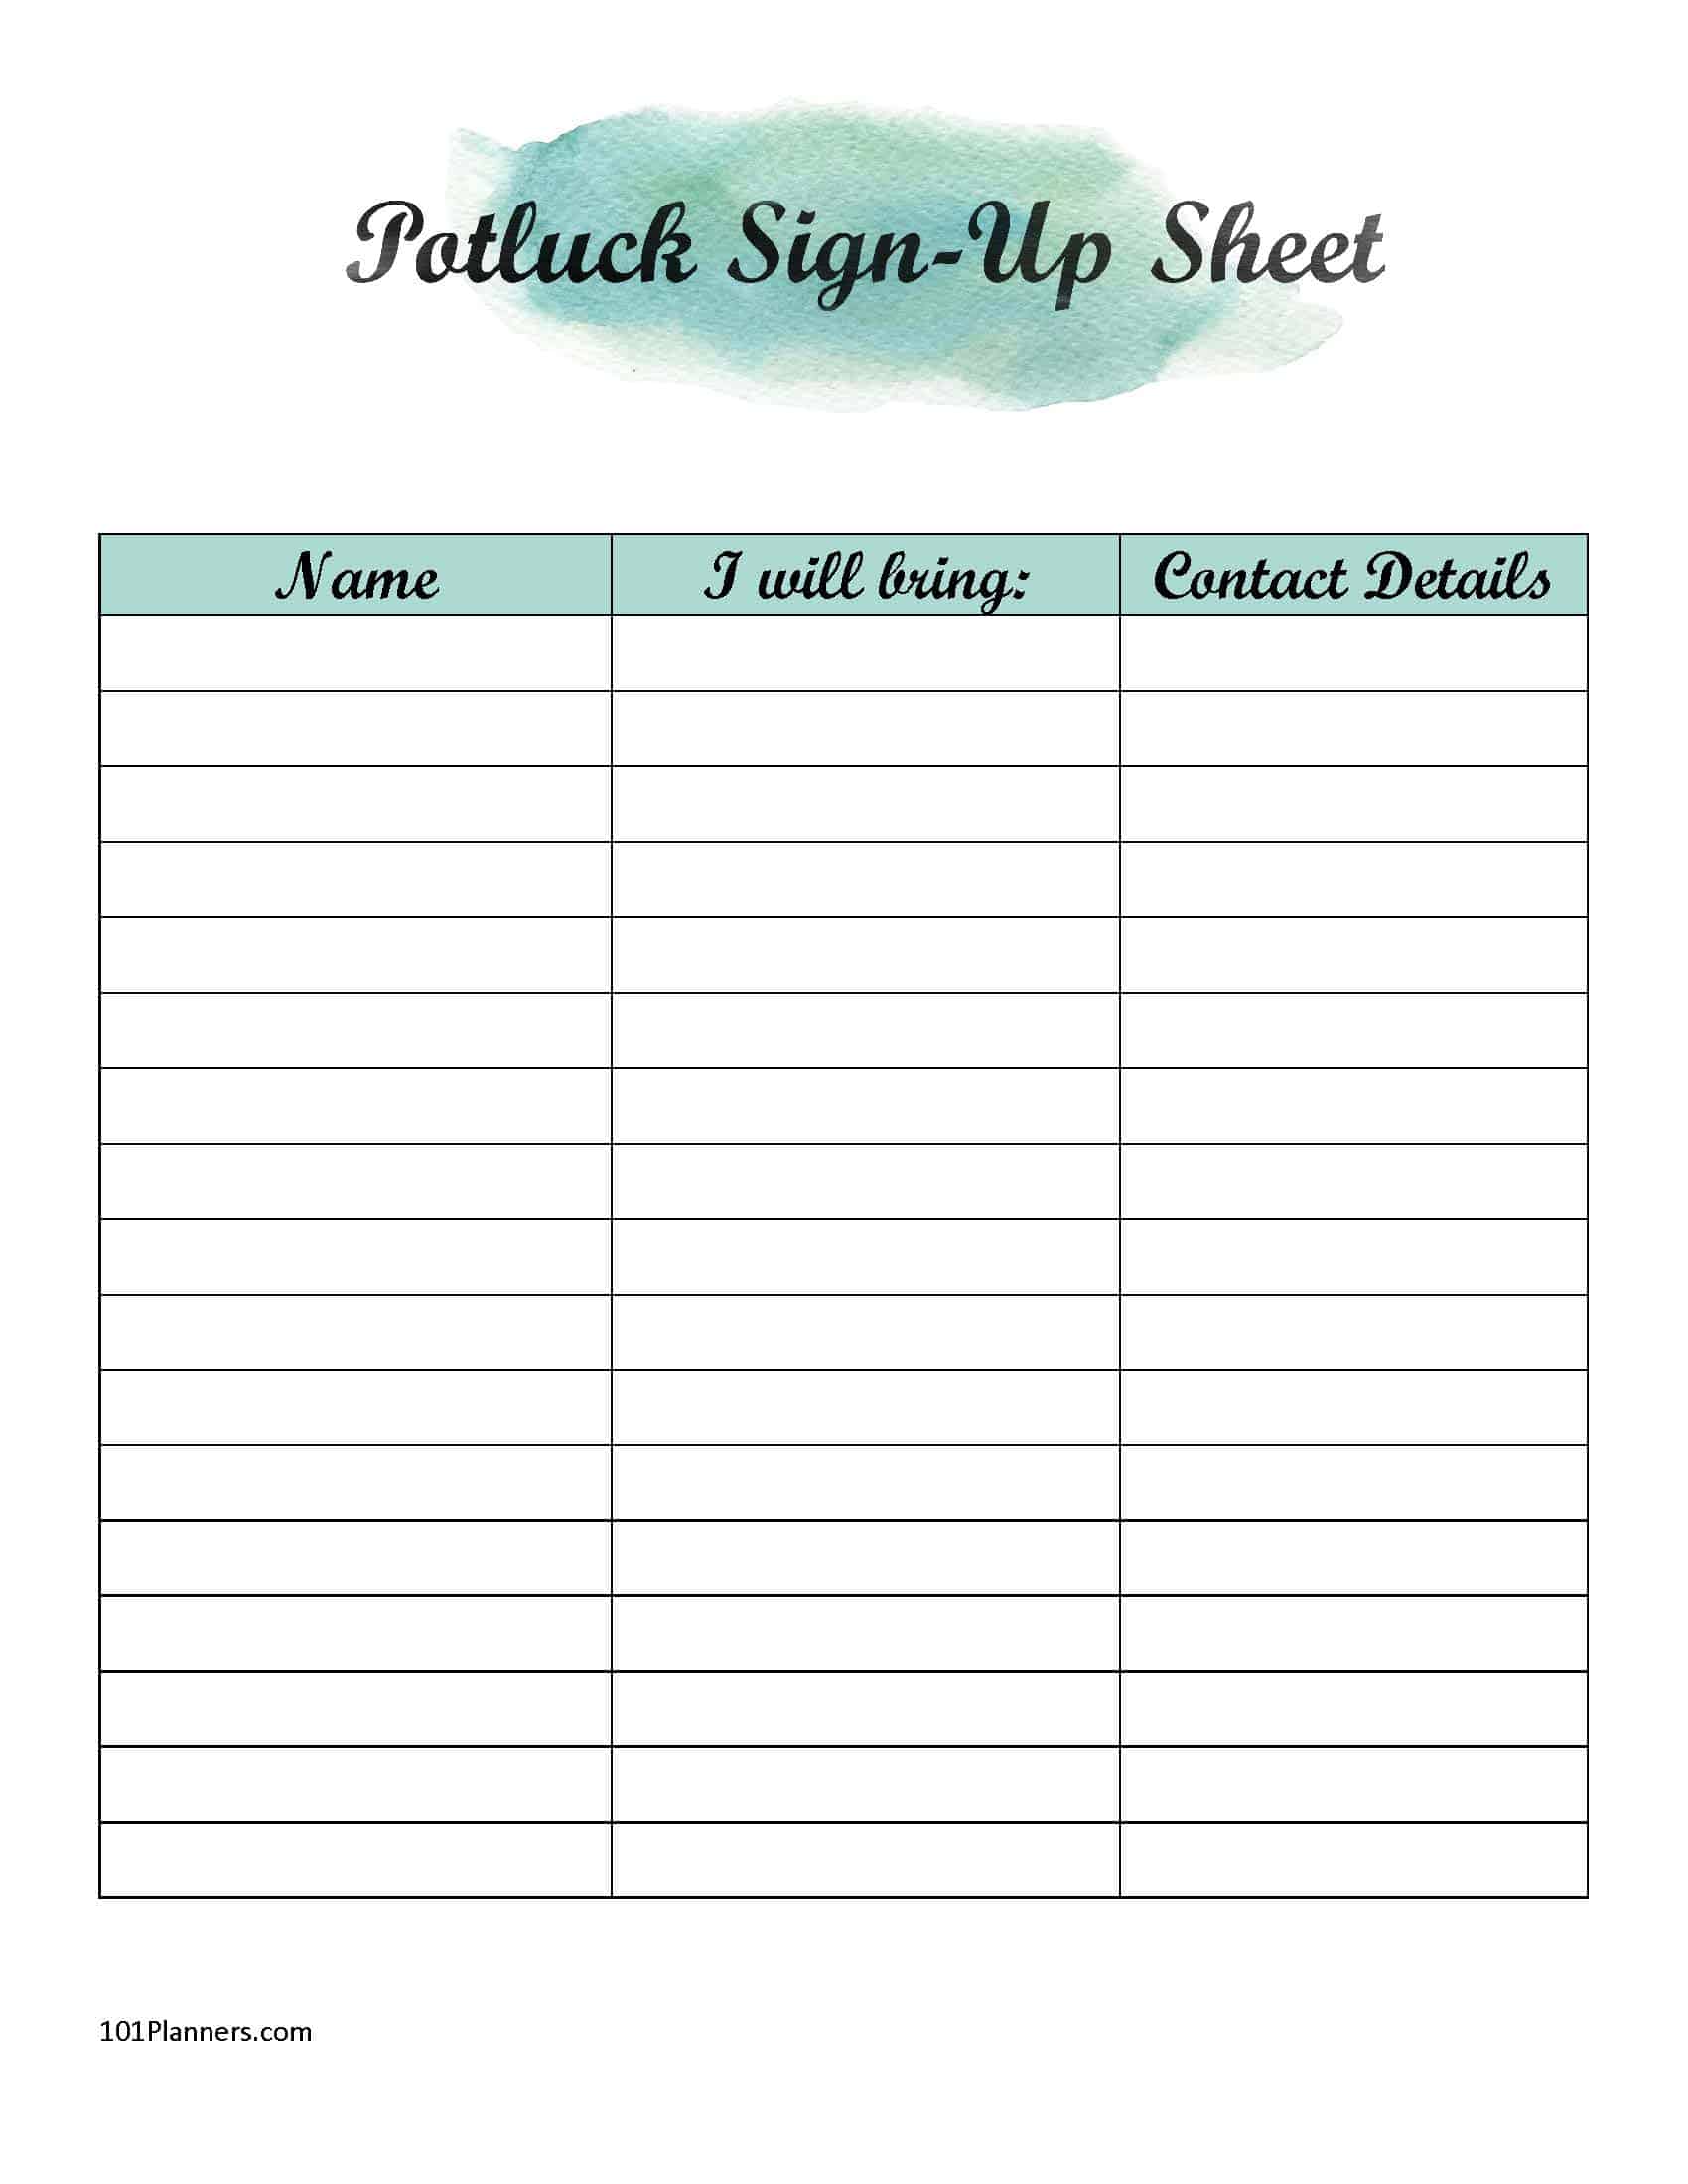 FREE Printable Potluck Sign Up Sheet Editable Instant Download